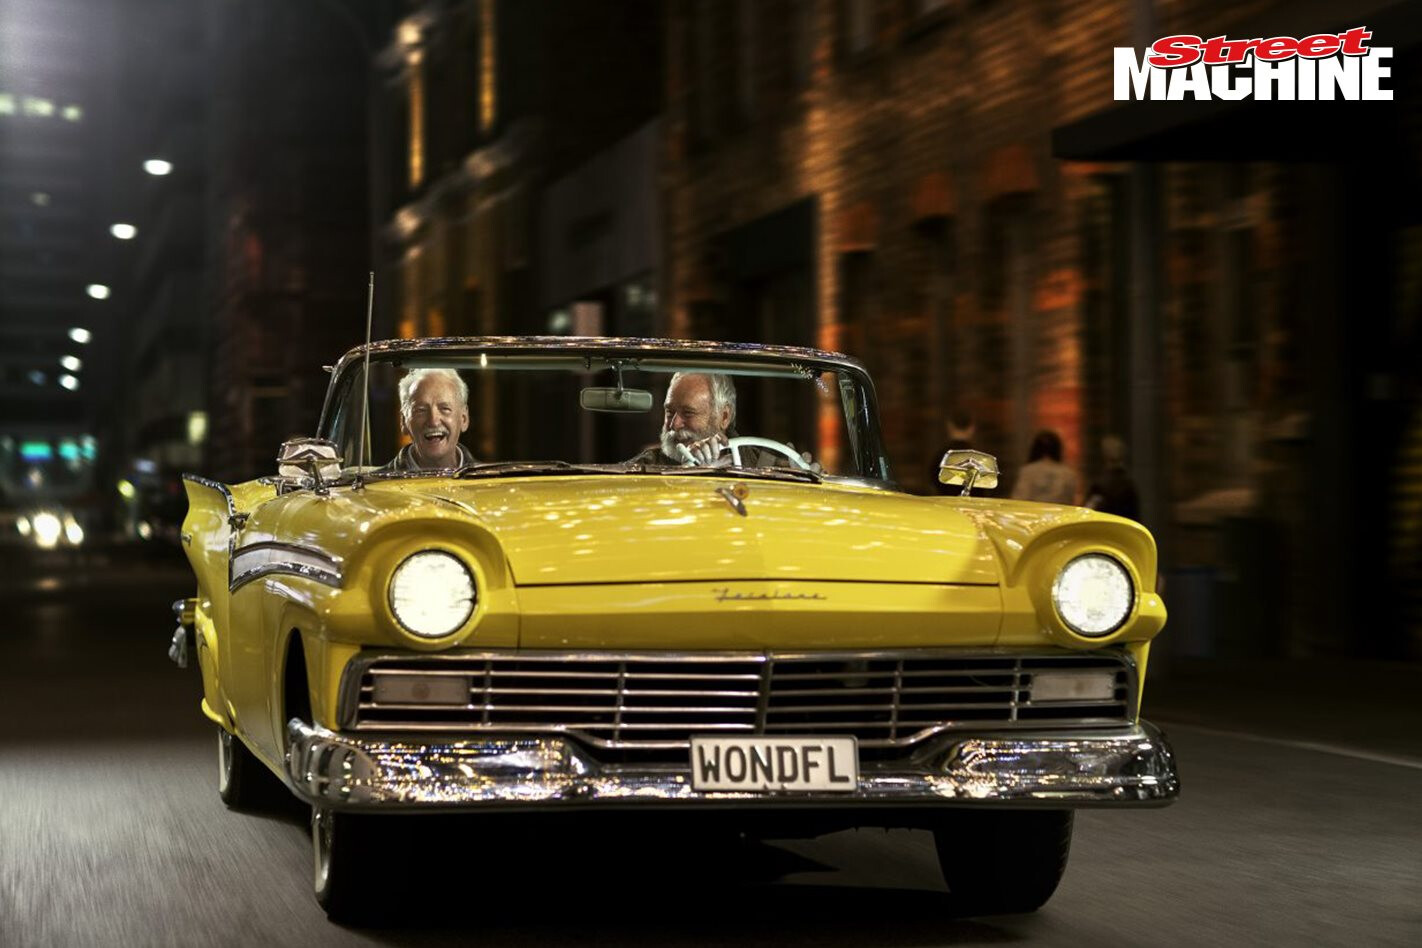 Kiwi electricity company builds electric ’57 Ford Fairlane – Video